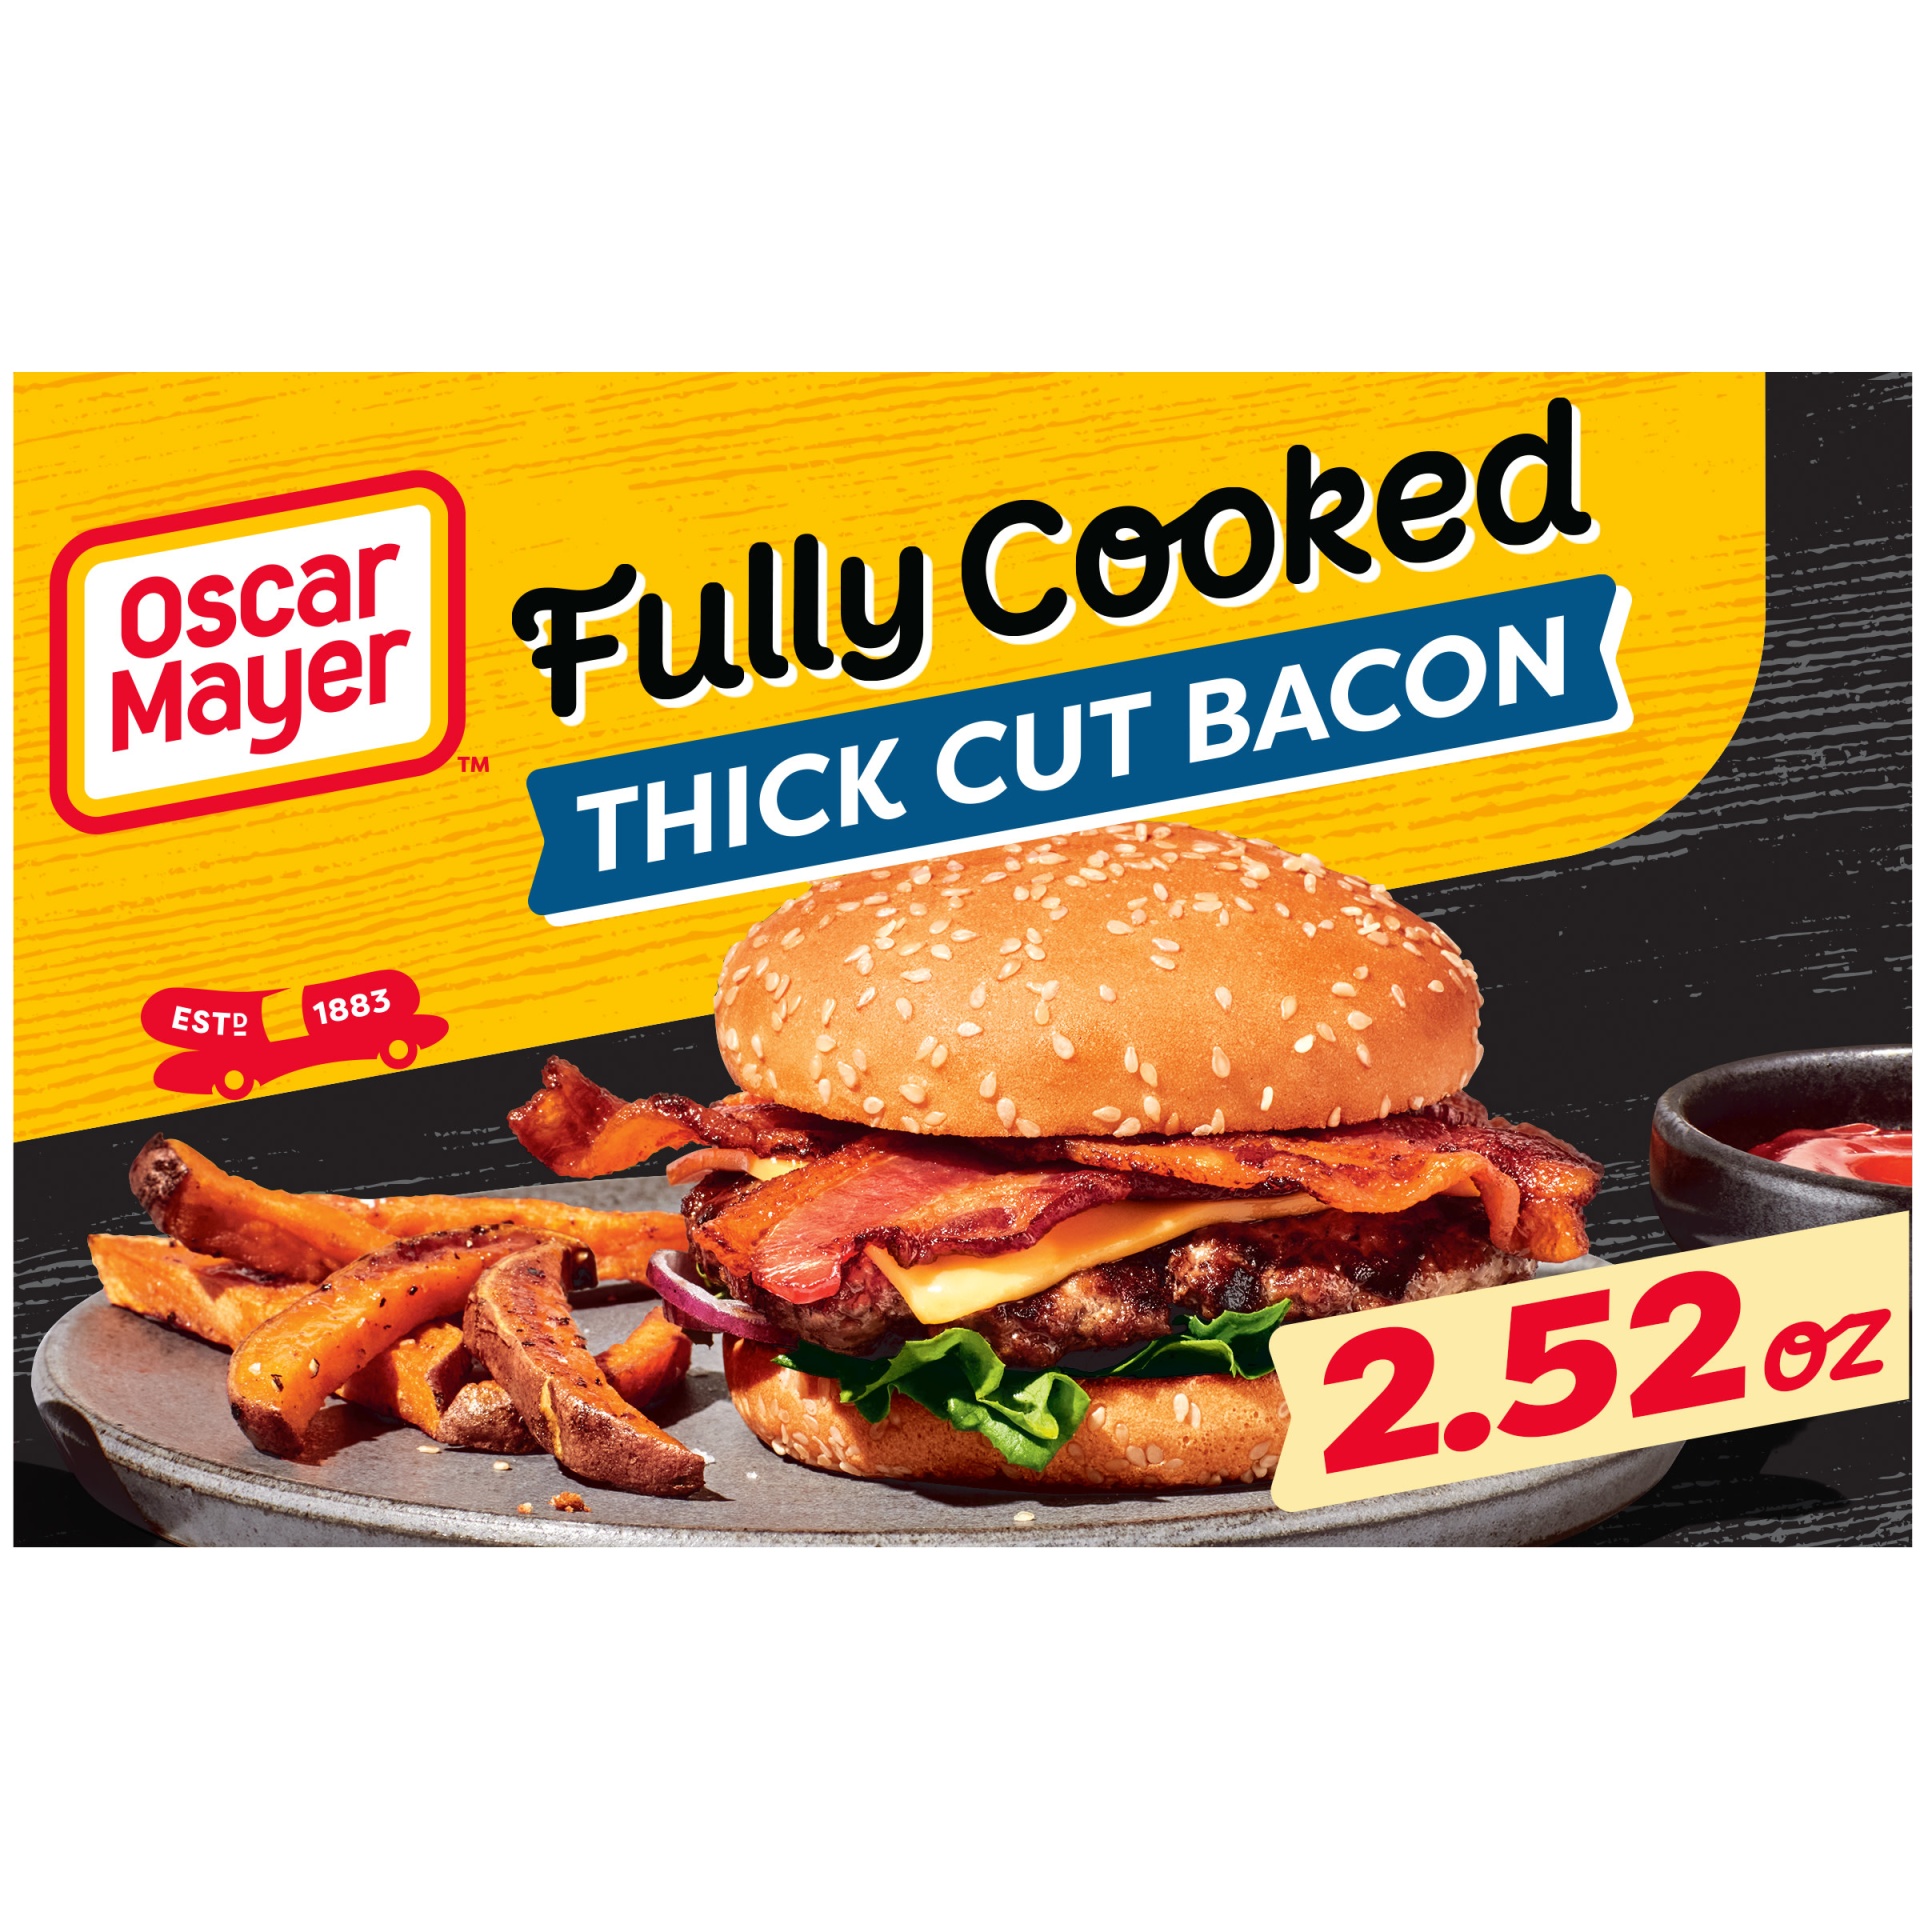 slide 1 of 7, Oscar Mayer Fully Cooked Thick Cut Bacon, 7-9 slices, 2.52 oz